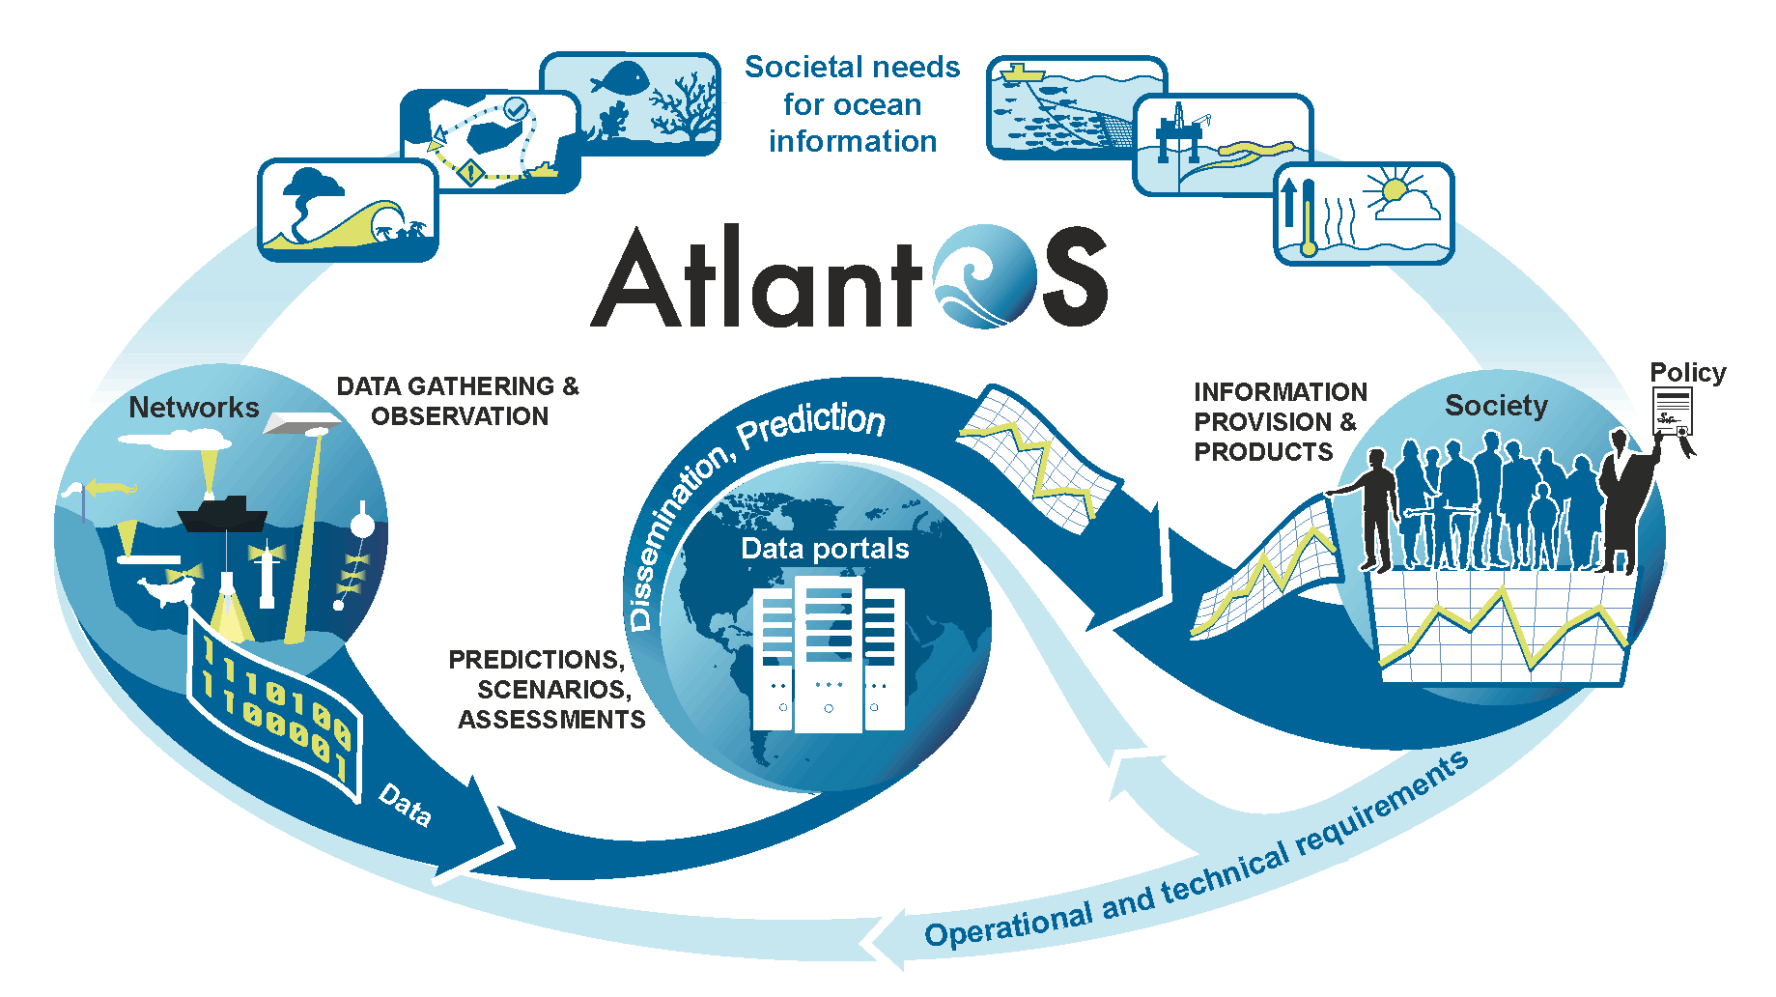 AtlantOS value chain: From societal need to observations and information products.